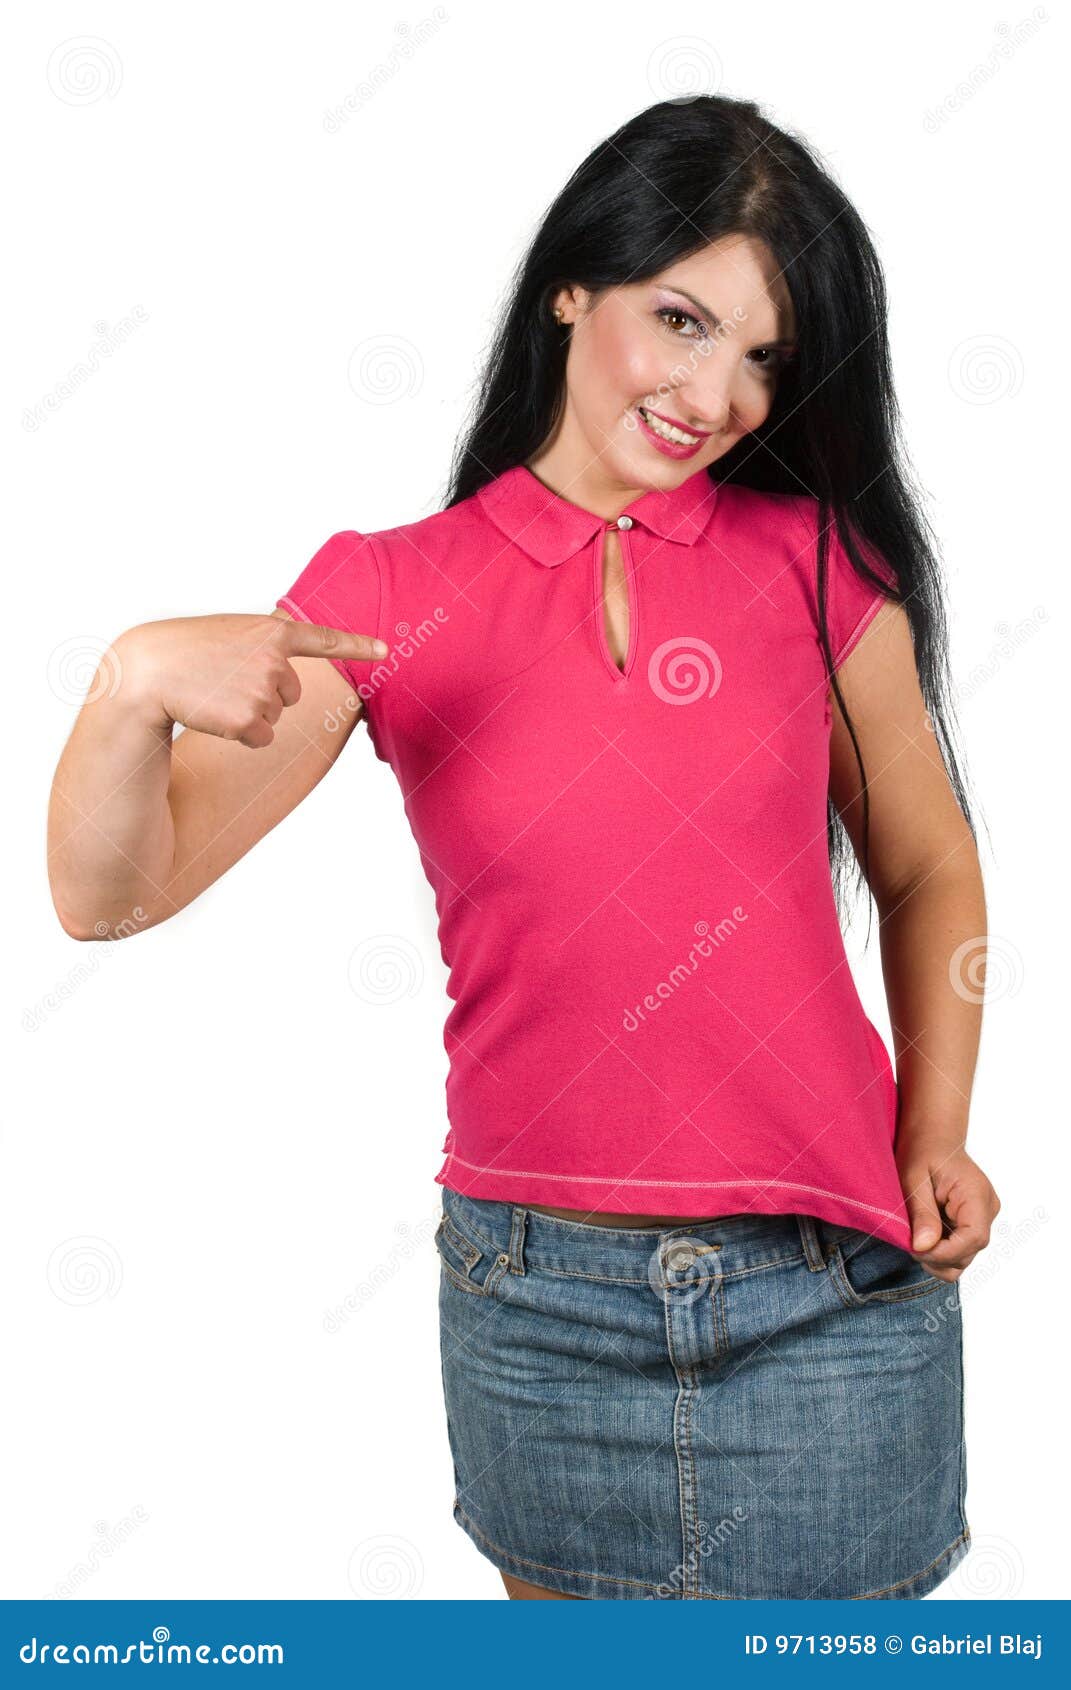 Woman With Large Breasts Posing In Pink Shirt Stock Photo, Picture and  Royalty Free Image. Image 97370863.